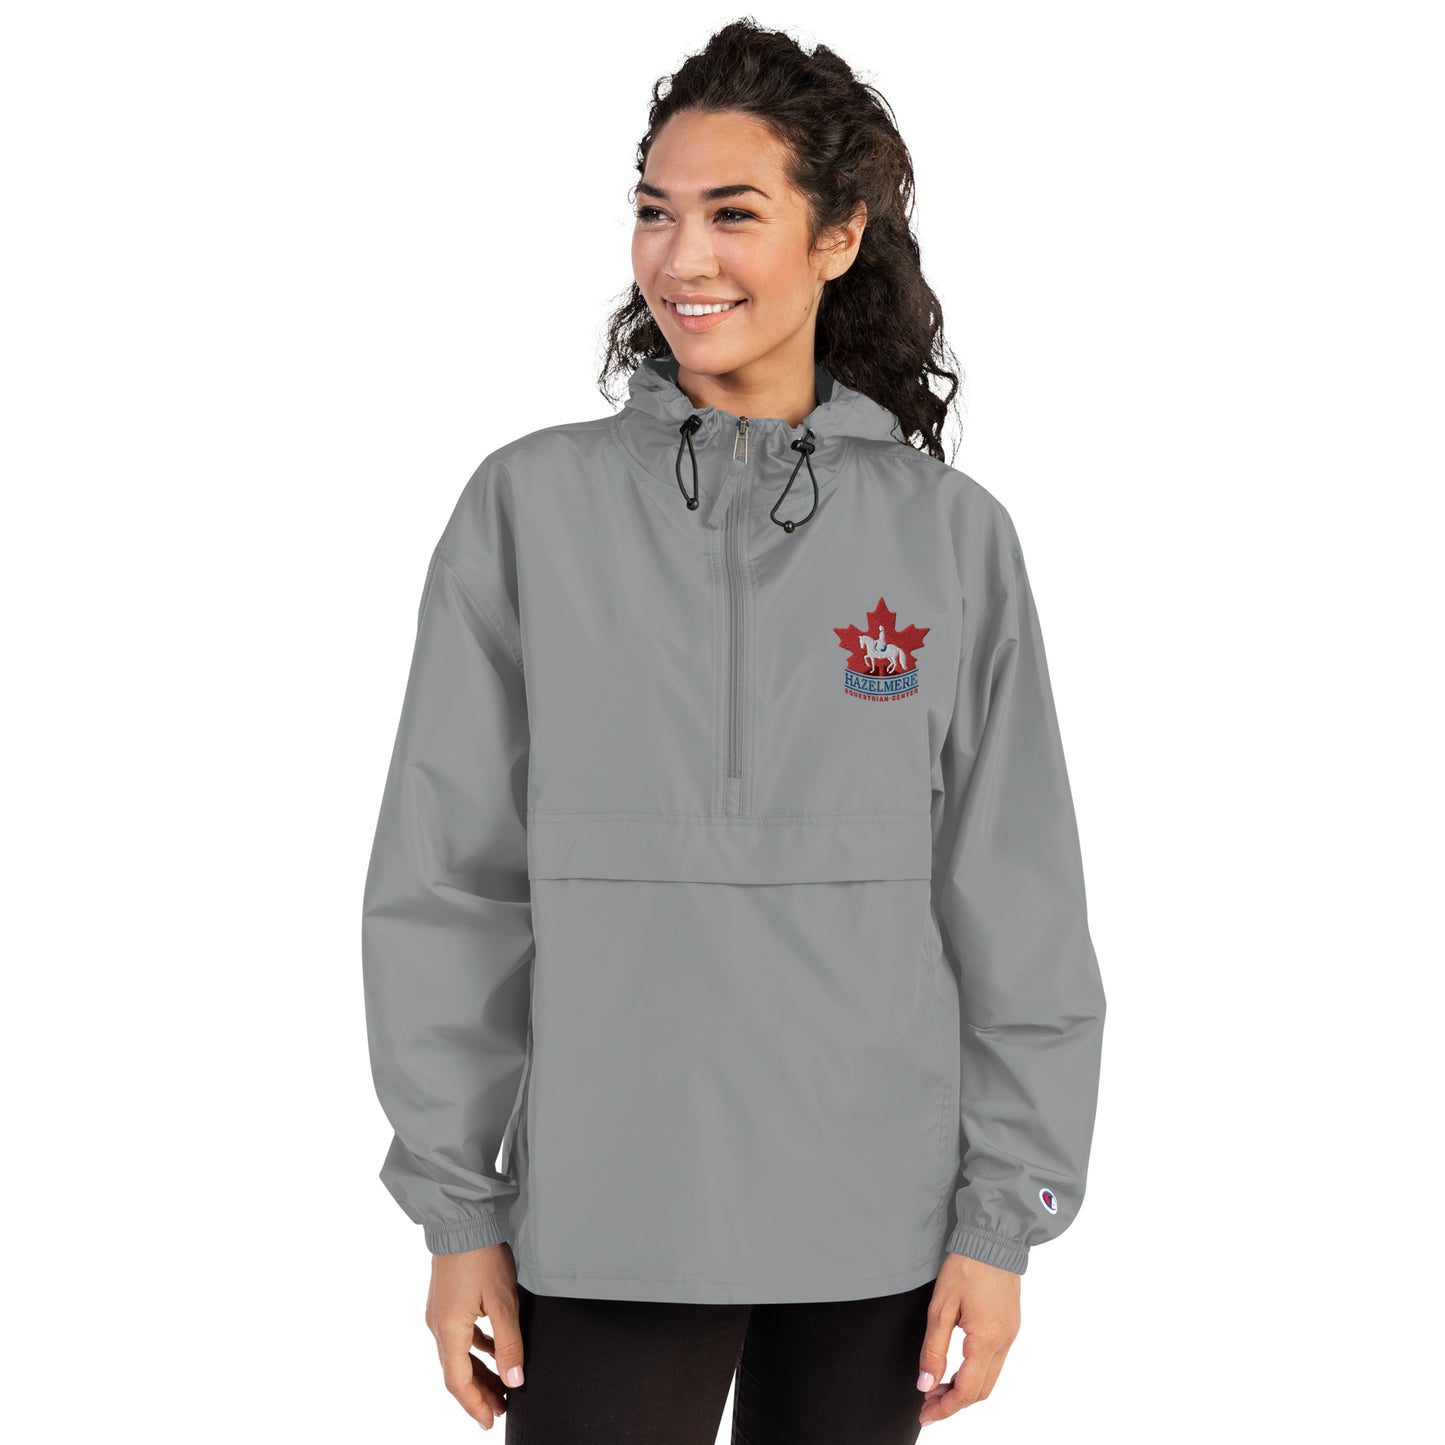 Hazelmere Equestrian Center Embroidered Champion Packable Jacket